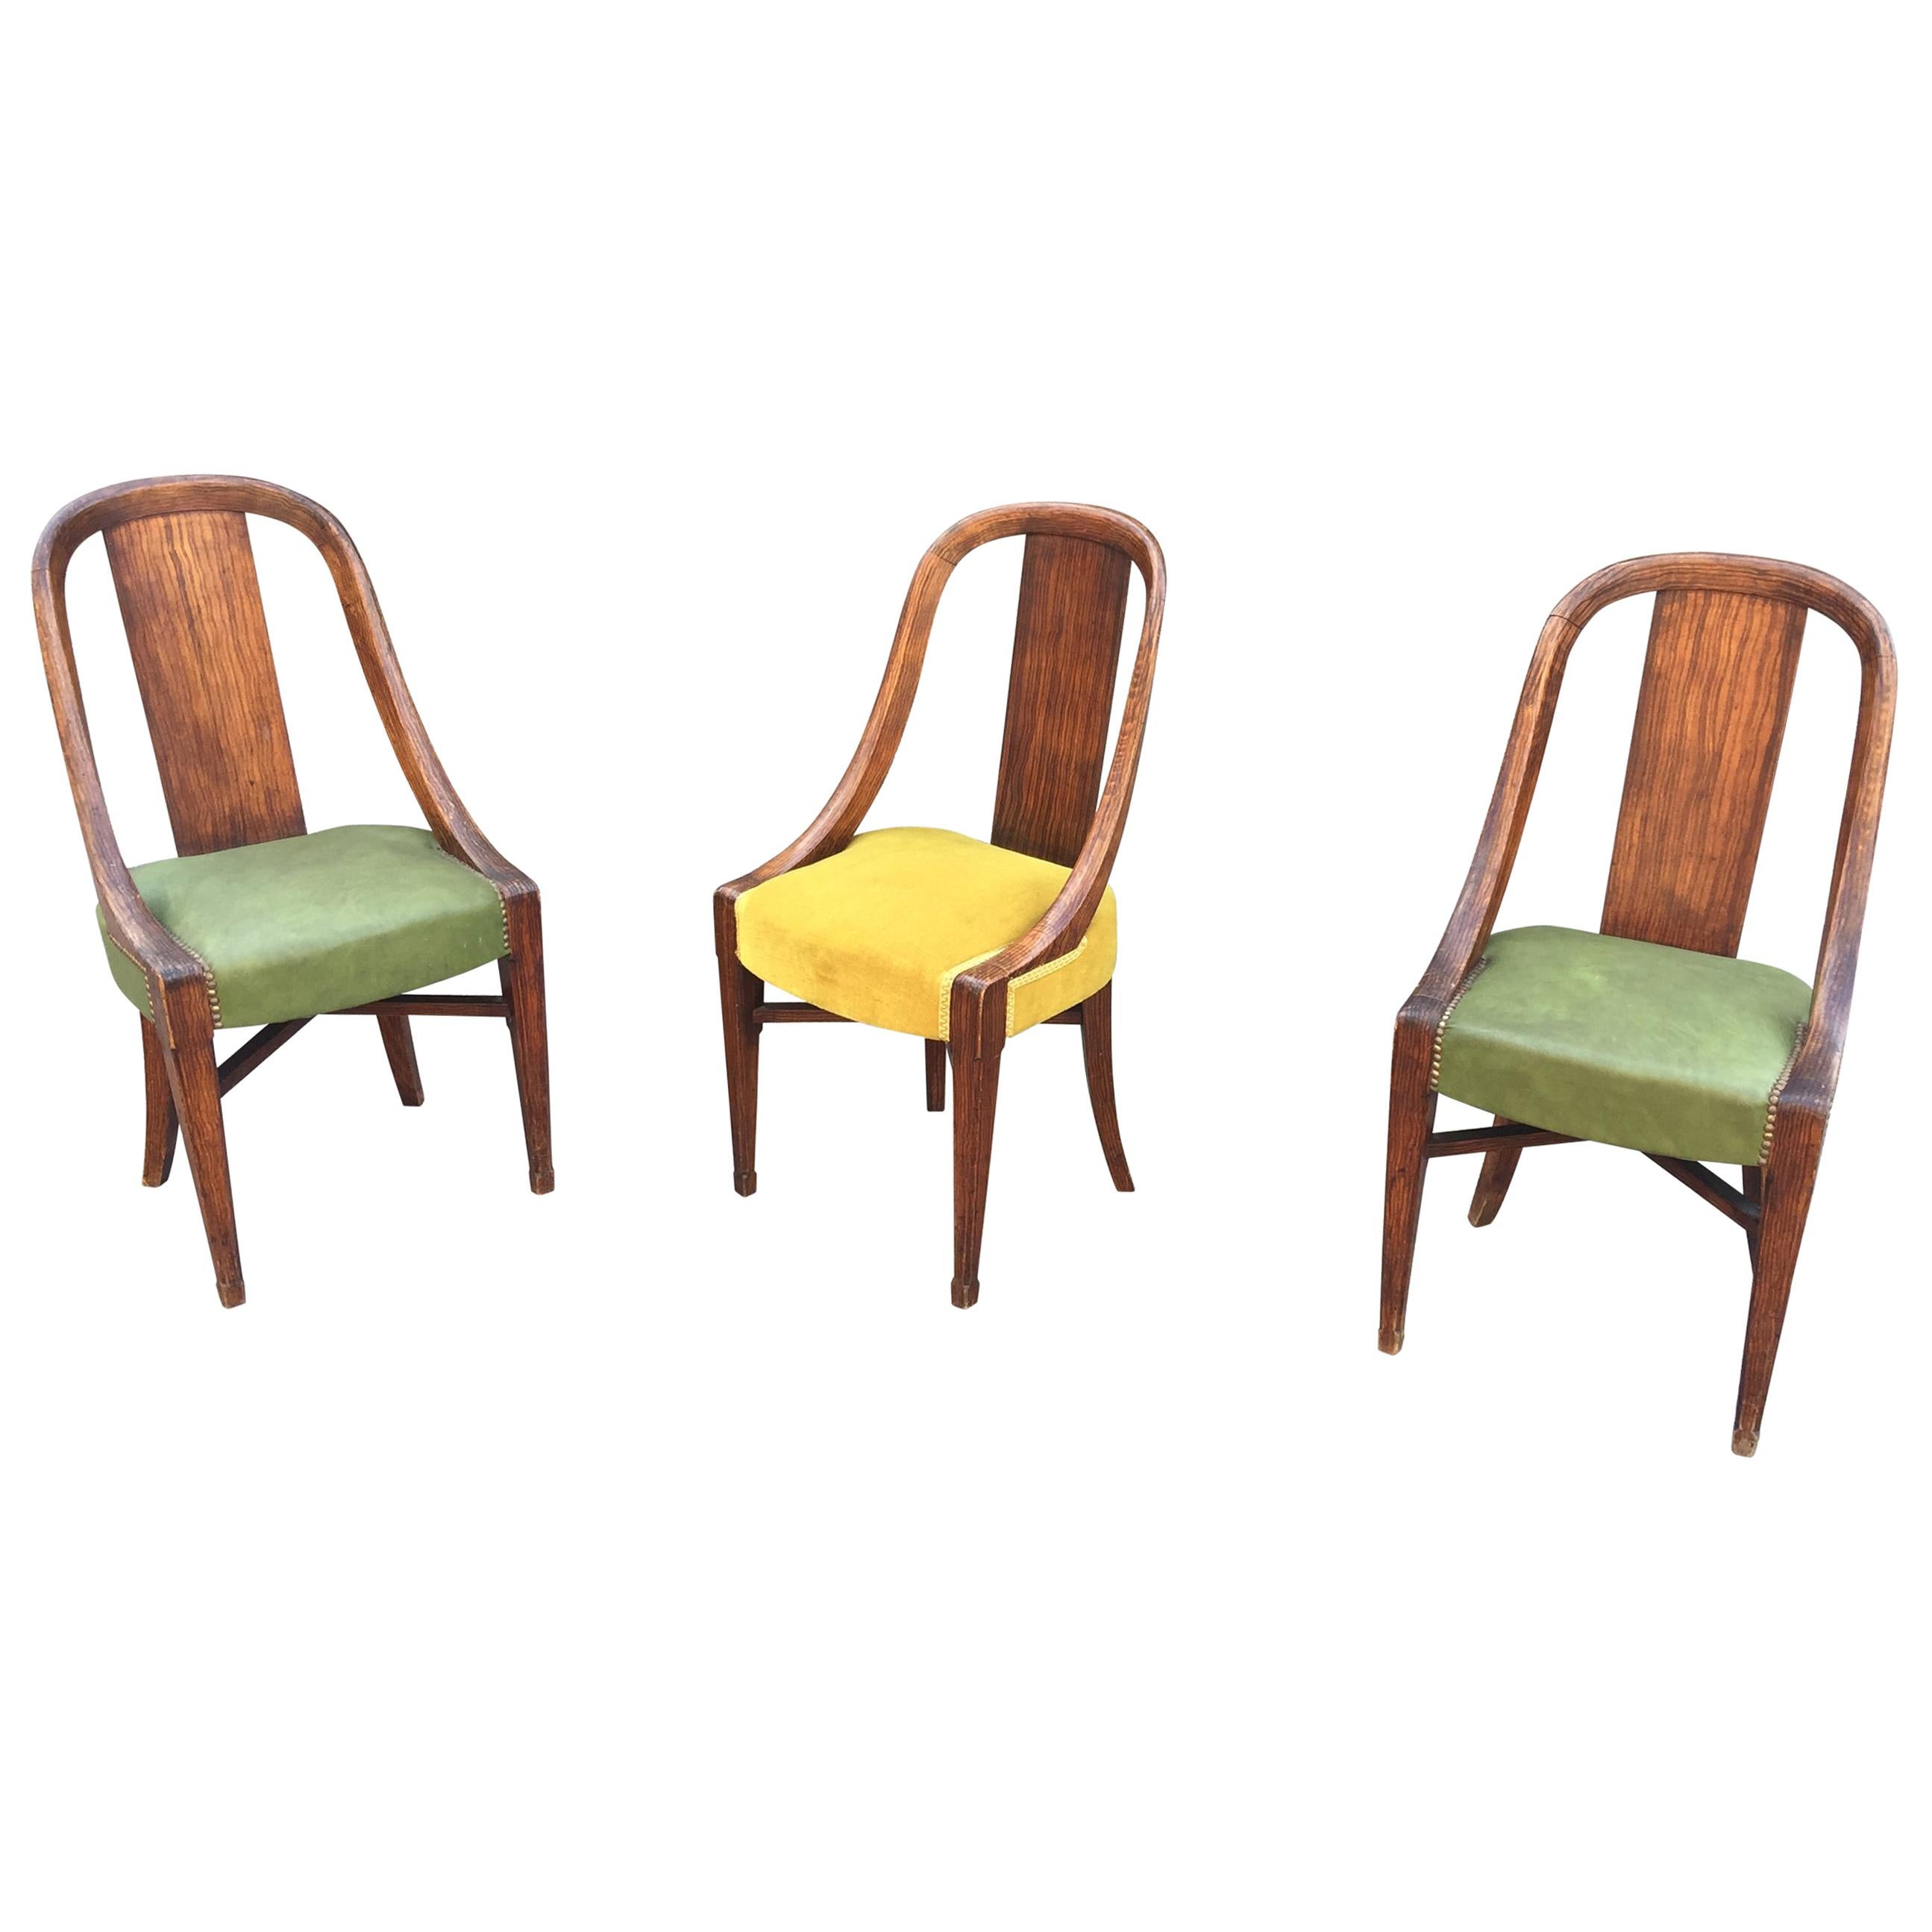 Three Art Deco Chairs, in Wood Painted Faux Wood Decor, circa 1925 For Sale